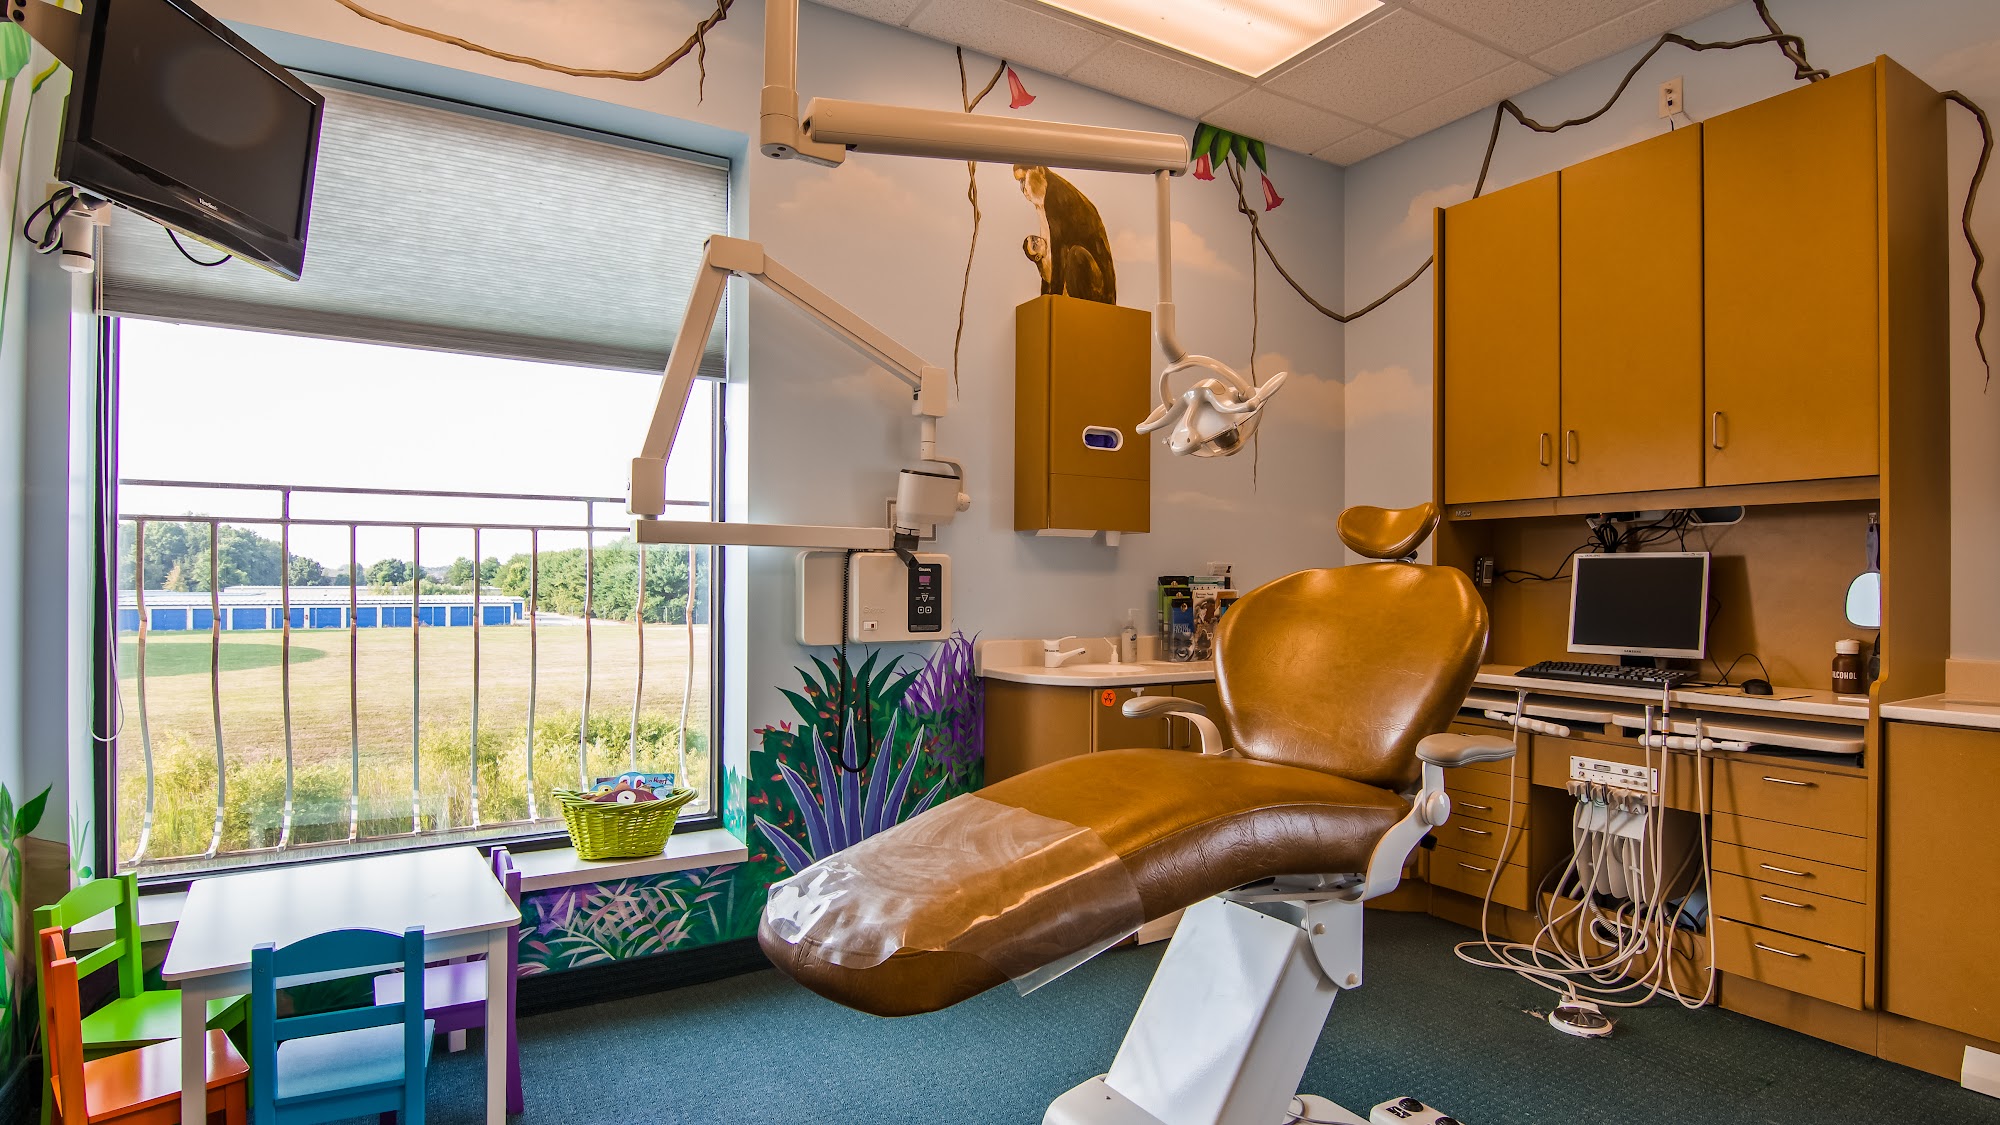 Maple Shade Dental of Peoria 11825 Knoxville Ave, Dunlap Illinois 61525